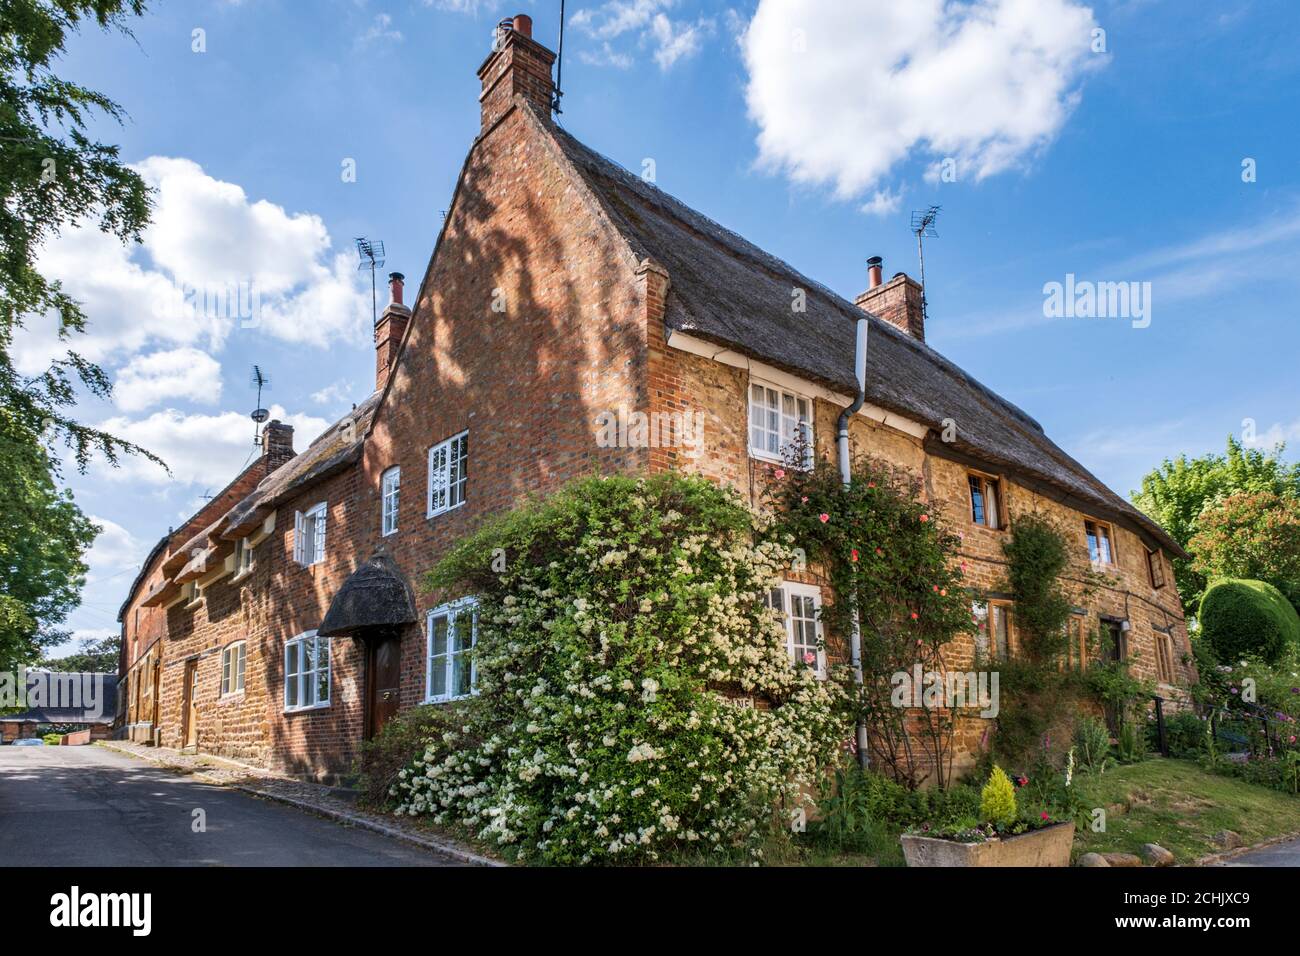 Picturesque thatched cottages in the village of Hallaton, Leicestershire, England, UK Stock Photo